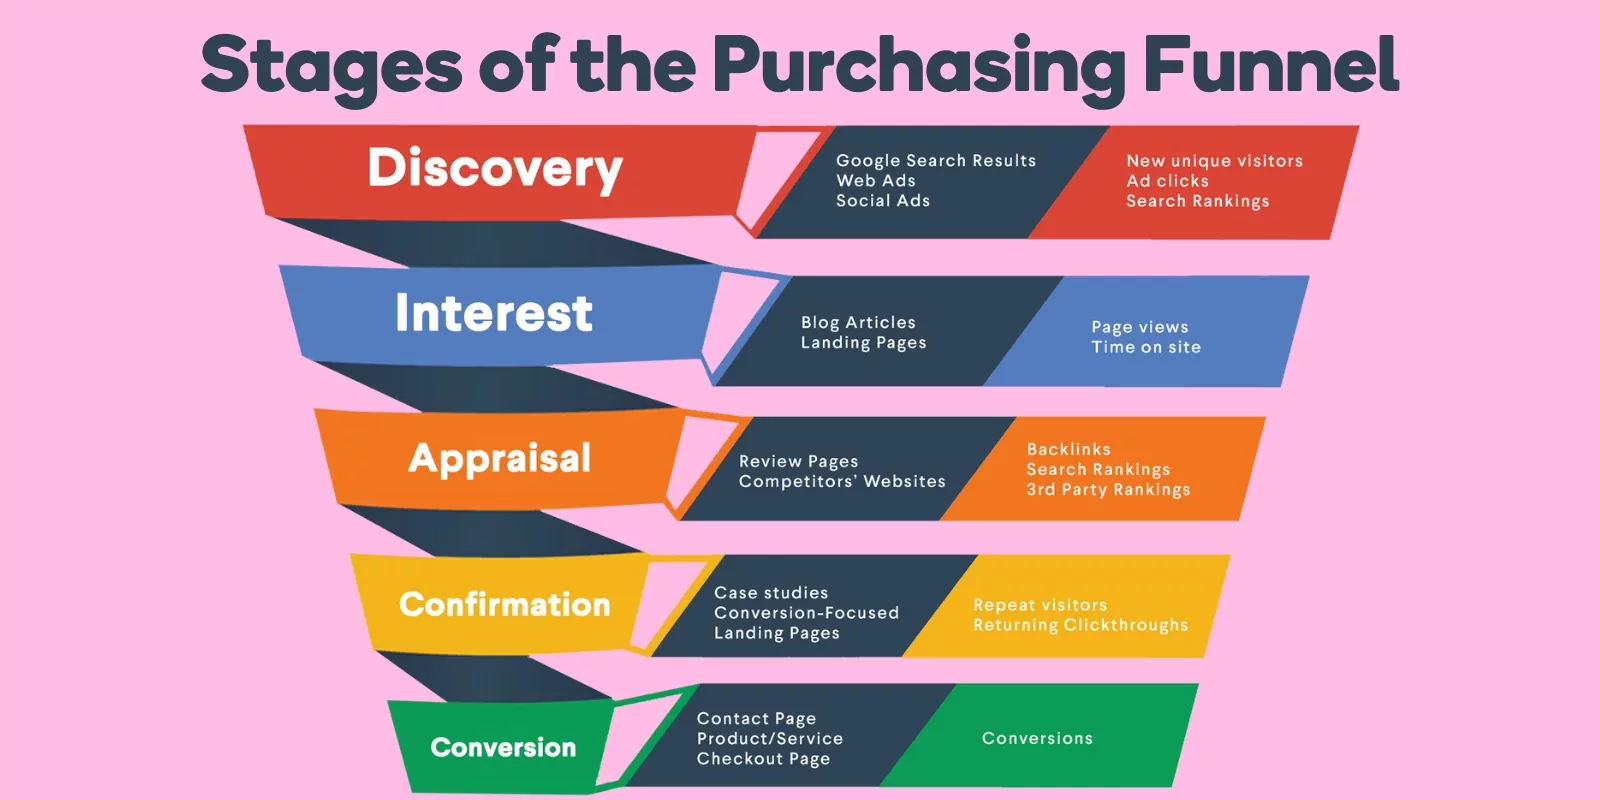 Stages of the Purchasing Funnel